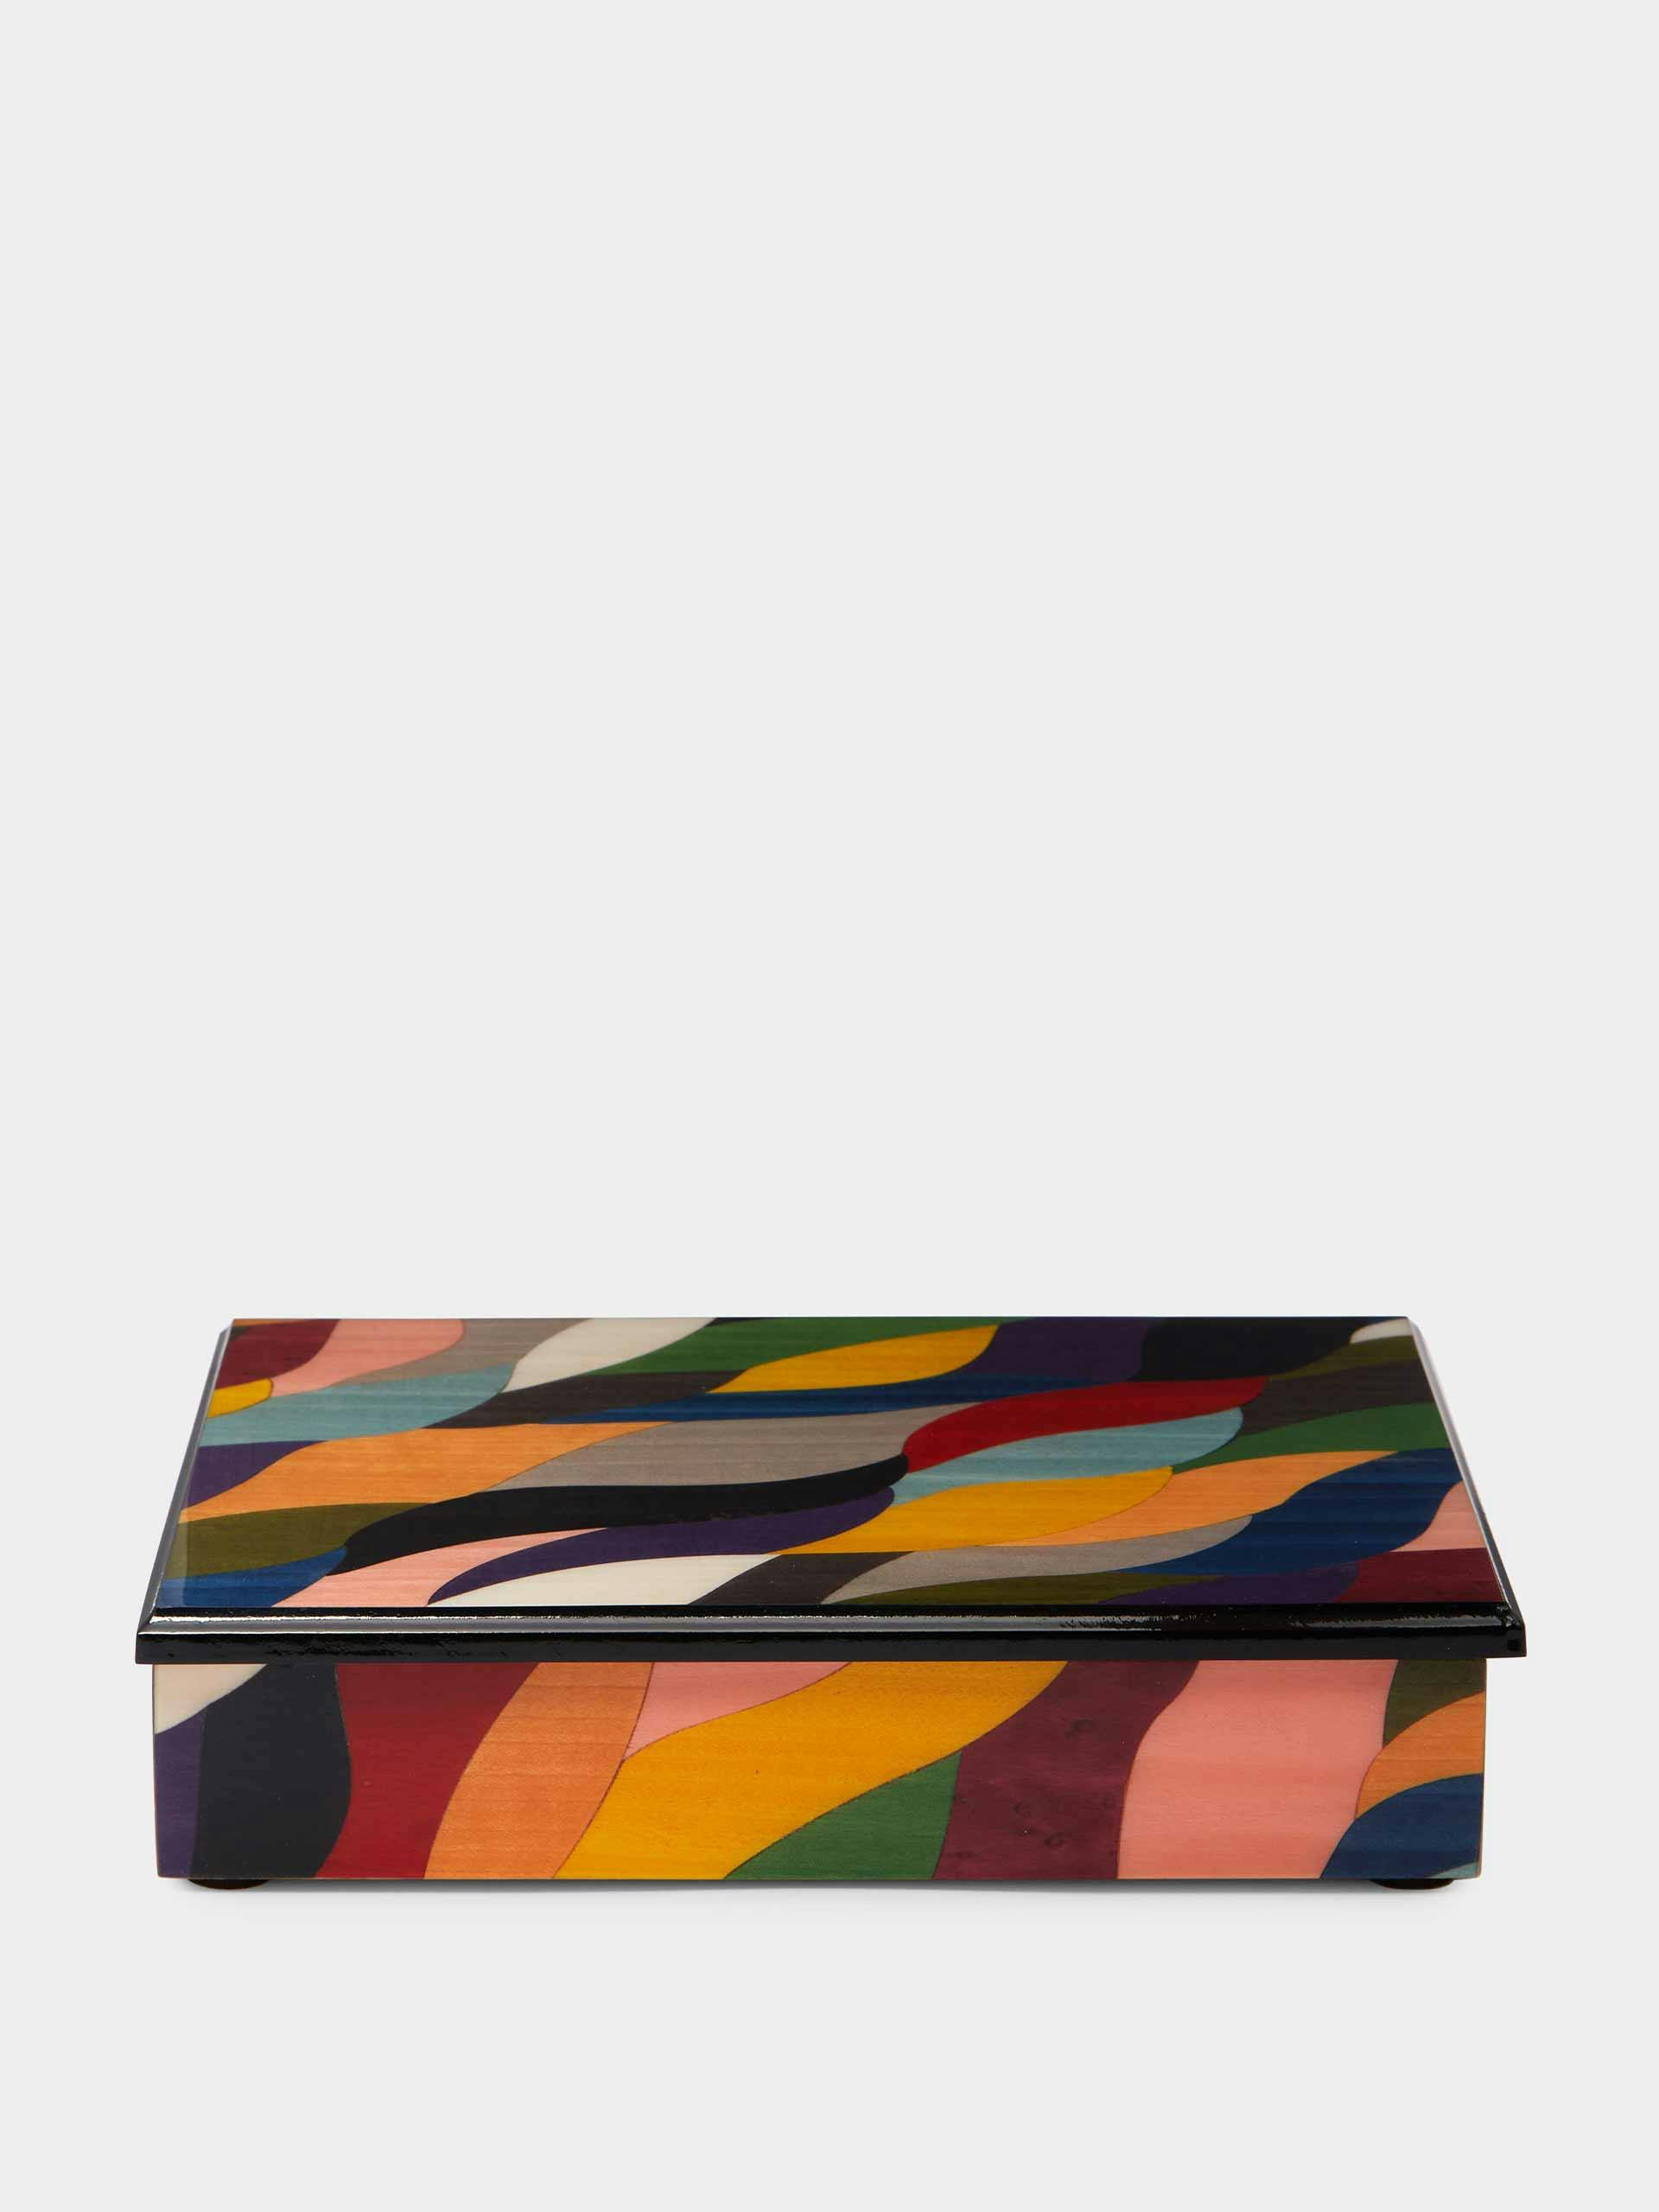 Patterned wooden box